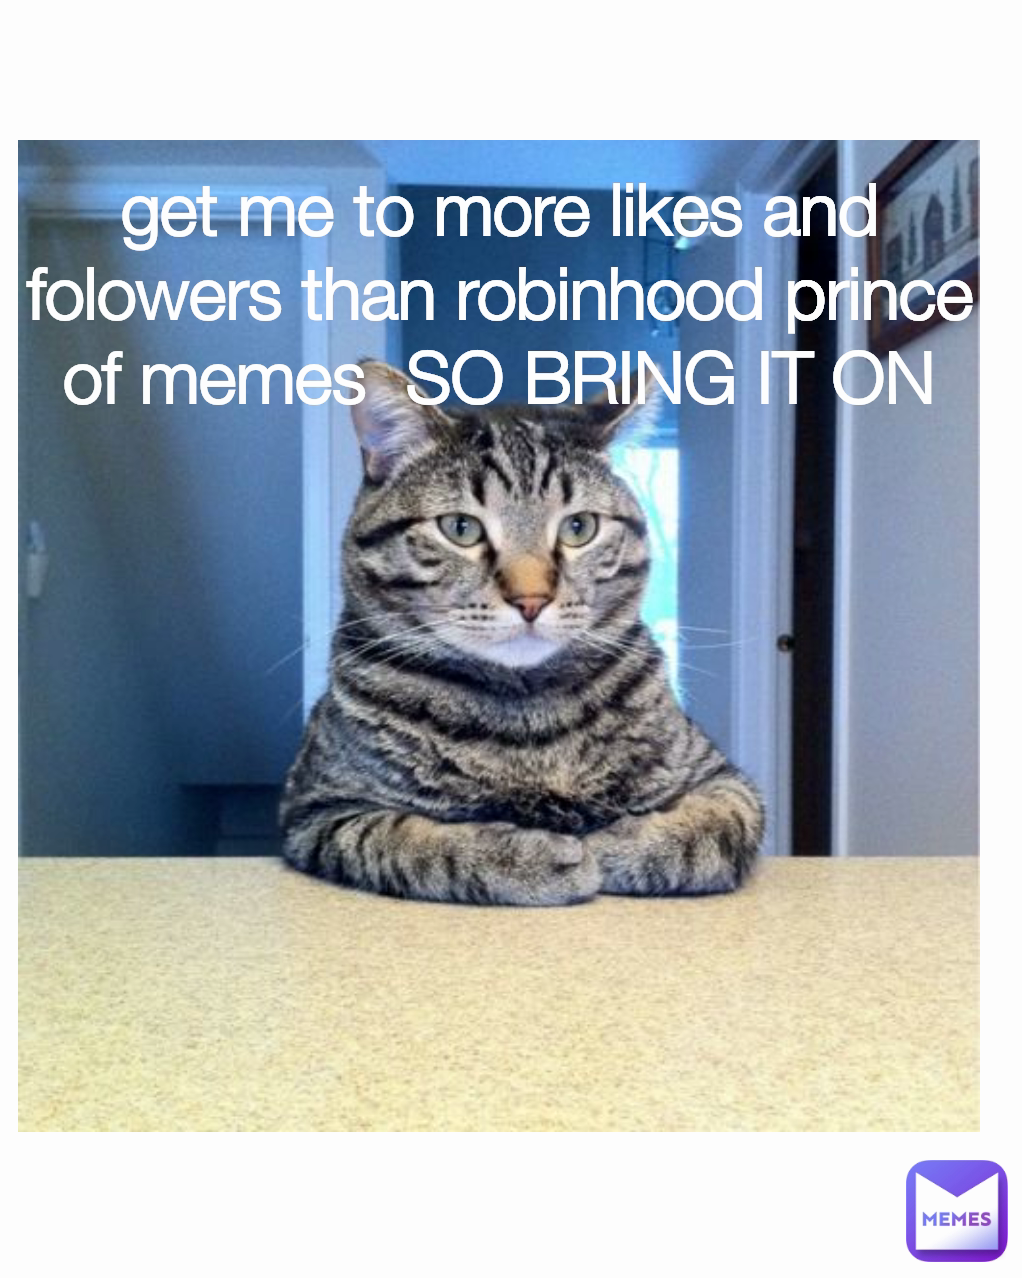 get me to more likes and folowers than robinhood prince of memes  SO BRING IT ON